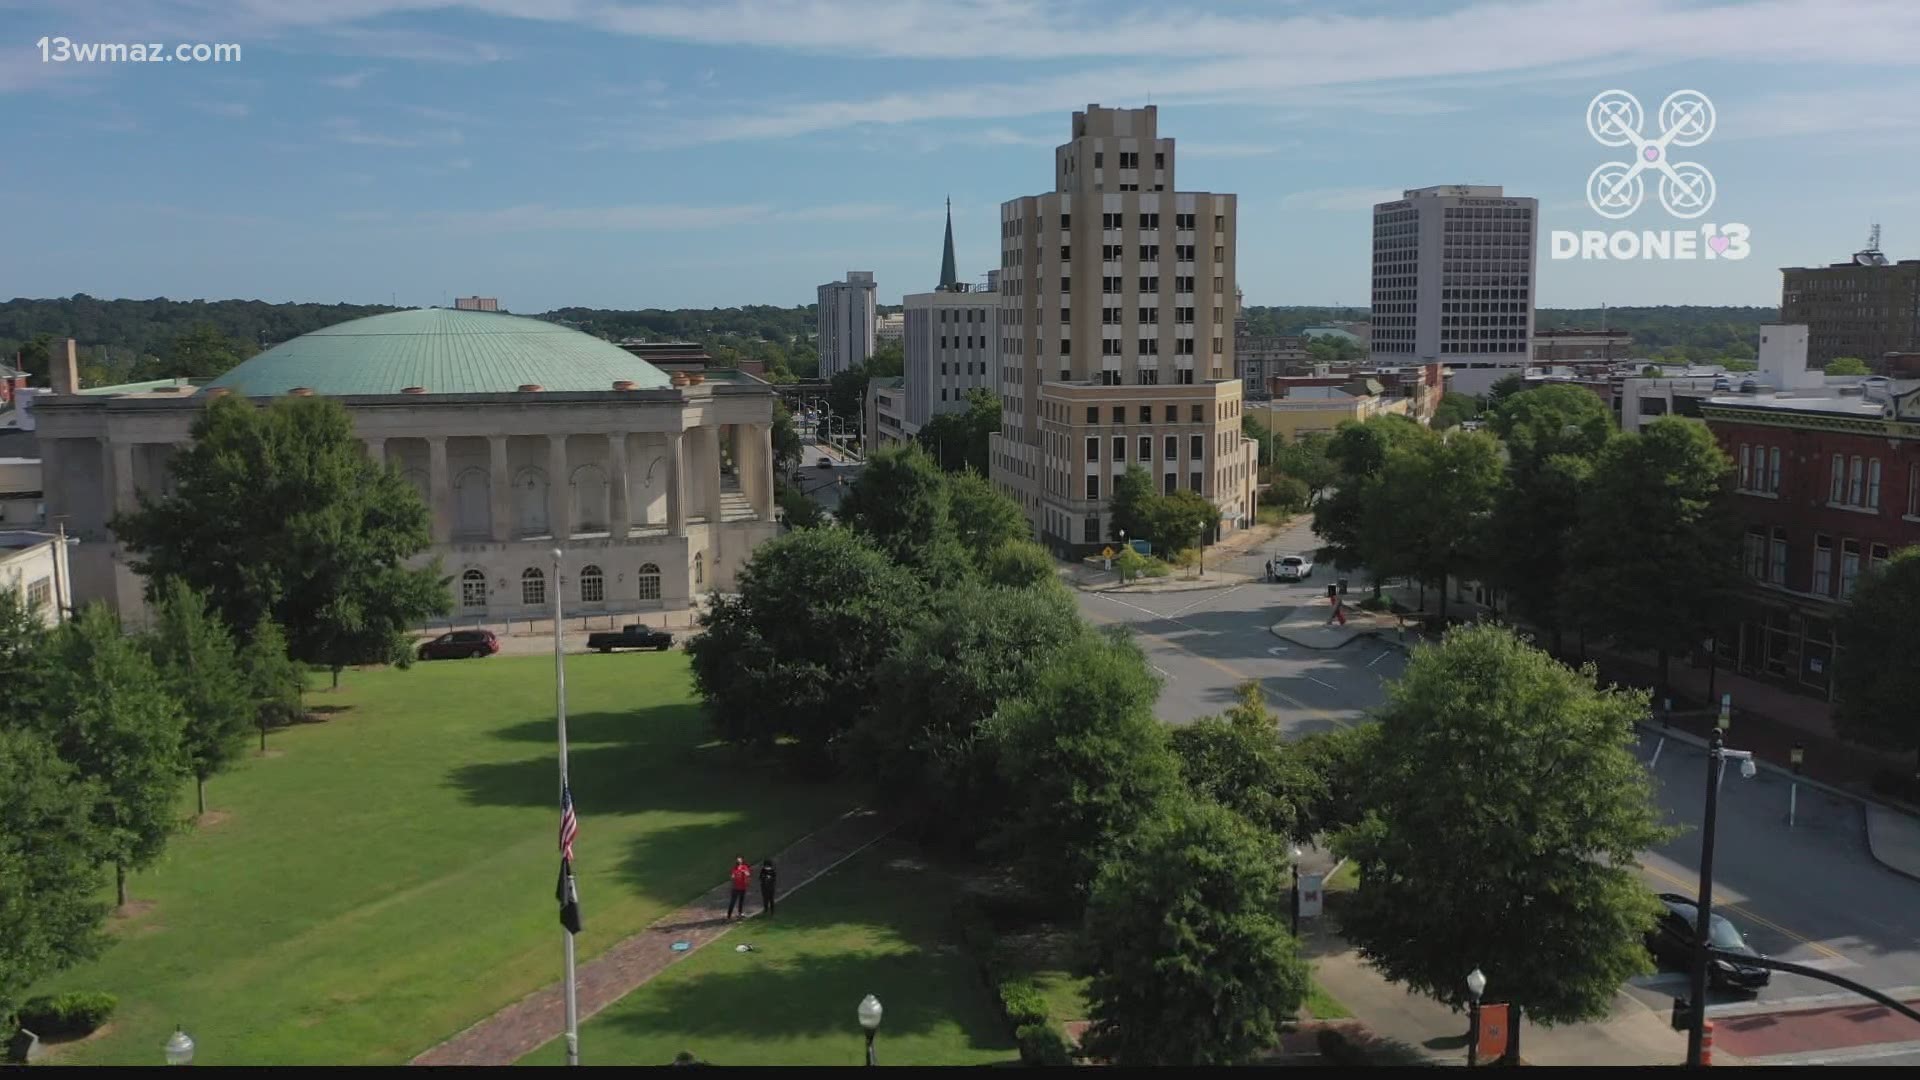 The Bibb County commission voted unanimously to approve a budget topping $174 million Tuesday evening.